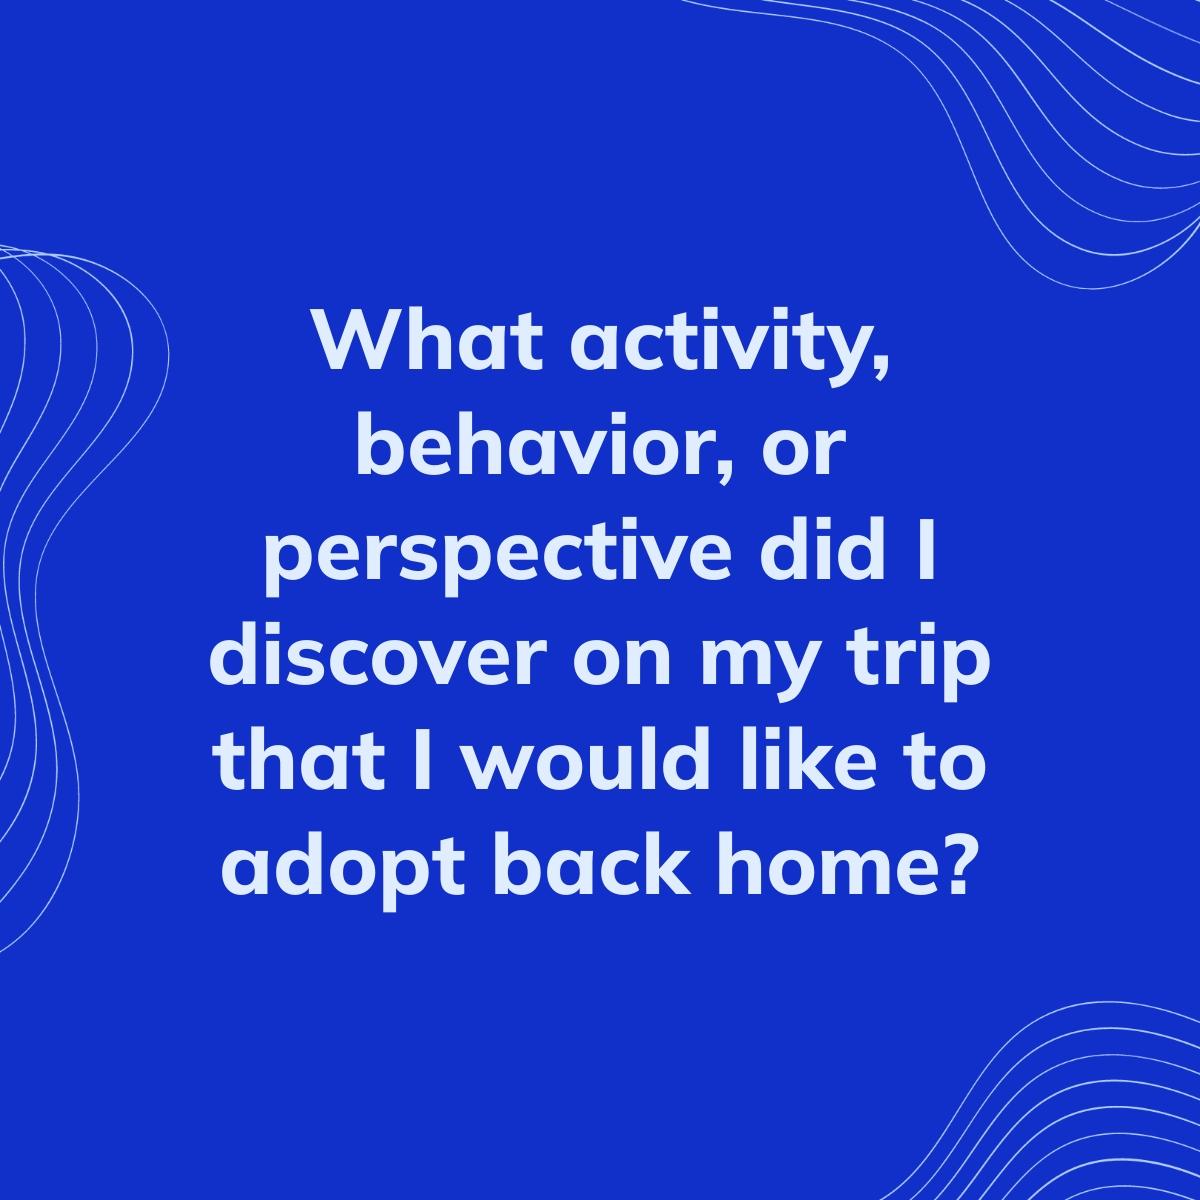 Journal Prompt: What activity, behavior, or perspective did I discover on my trip that I would like to adopt back home?